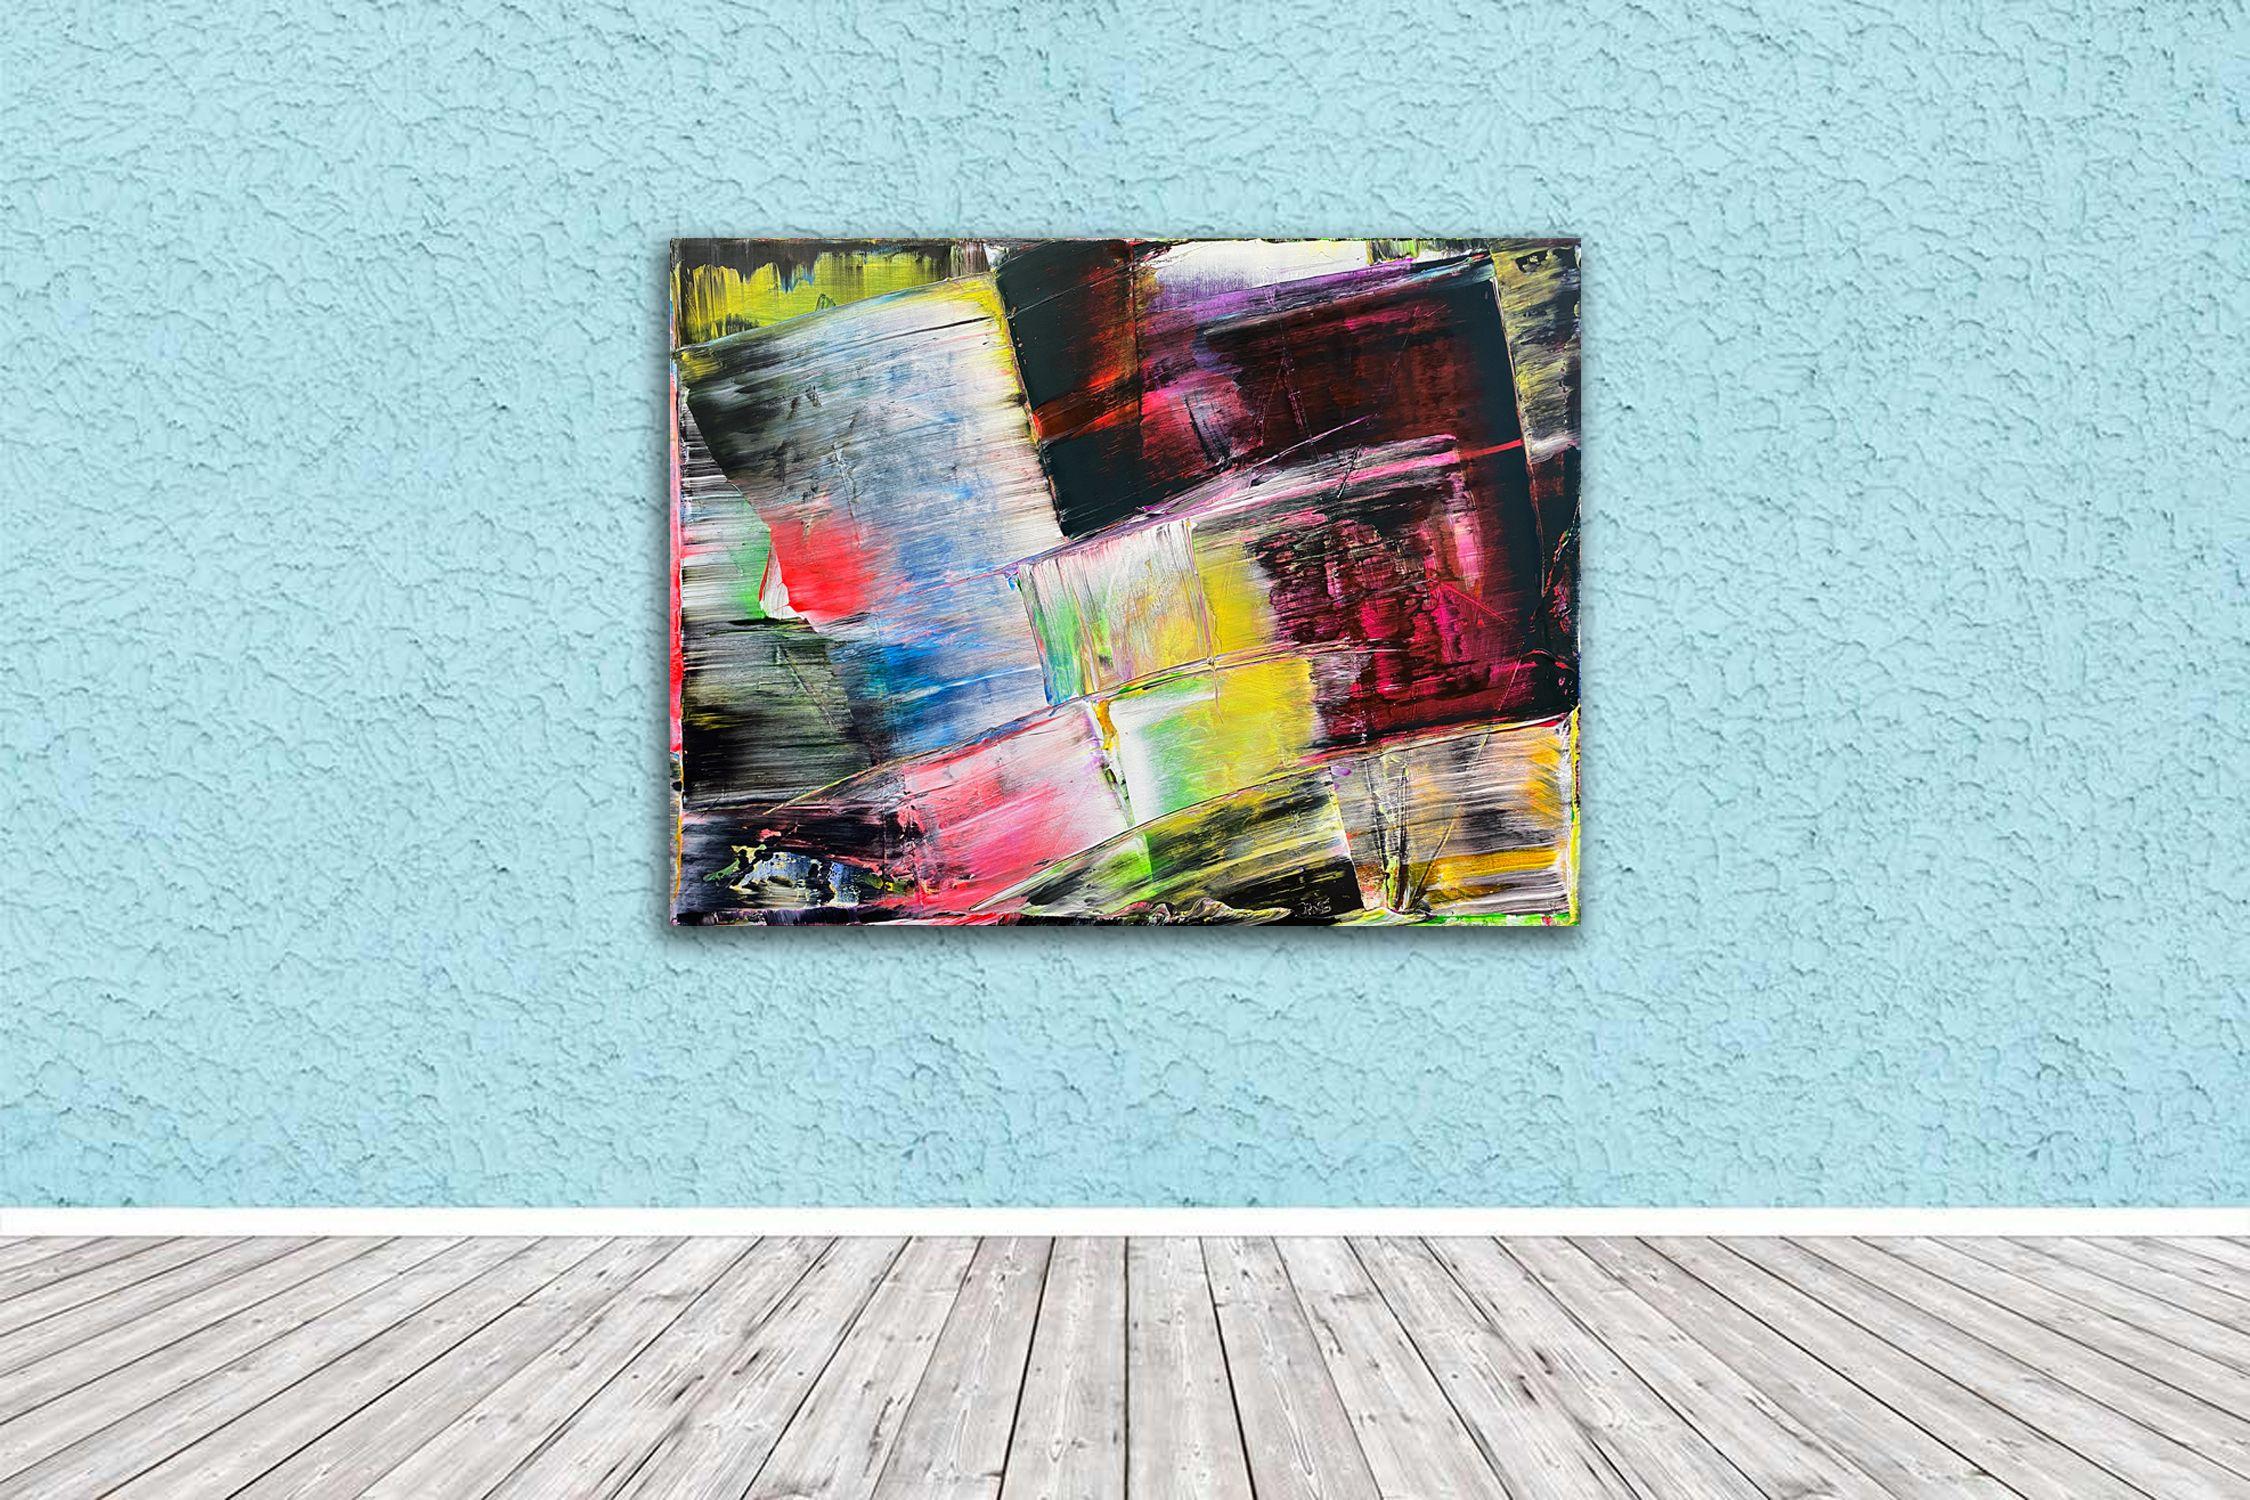 This is a unique large modern PMS abstract acrylic painting that will make a statement in your home or office. This painting is fierce, bold, energetic, and mysterious. The colors streak and overlap, while also being contrasted by bold, vibrant